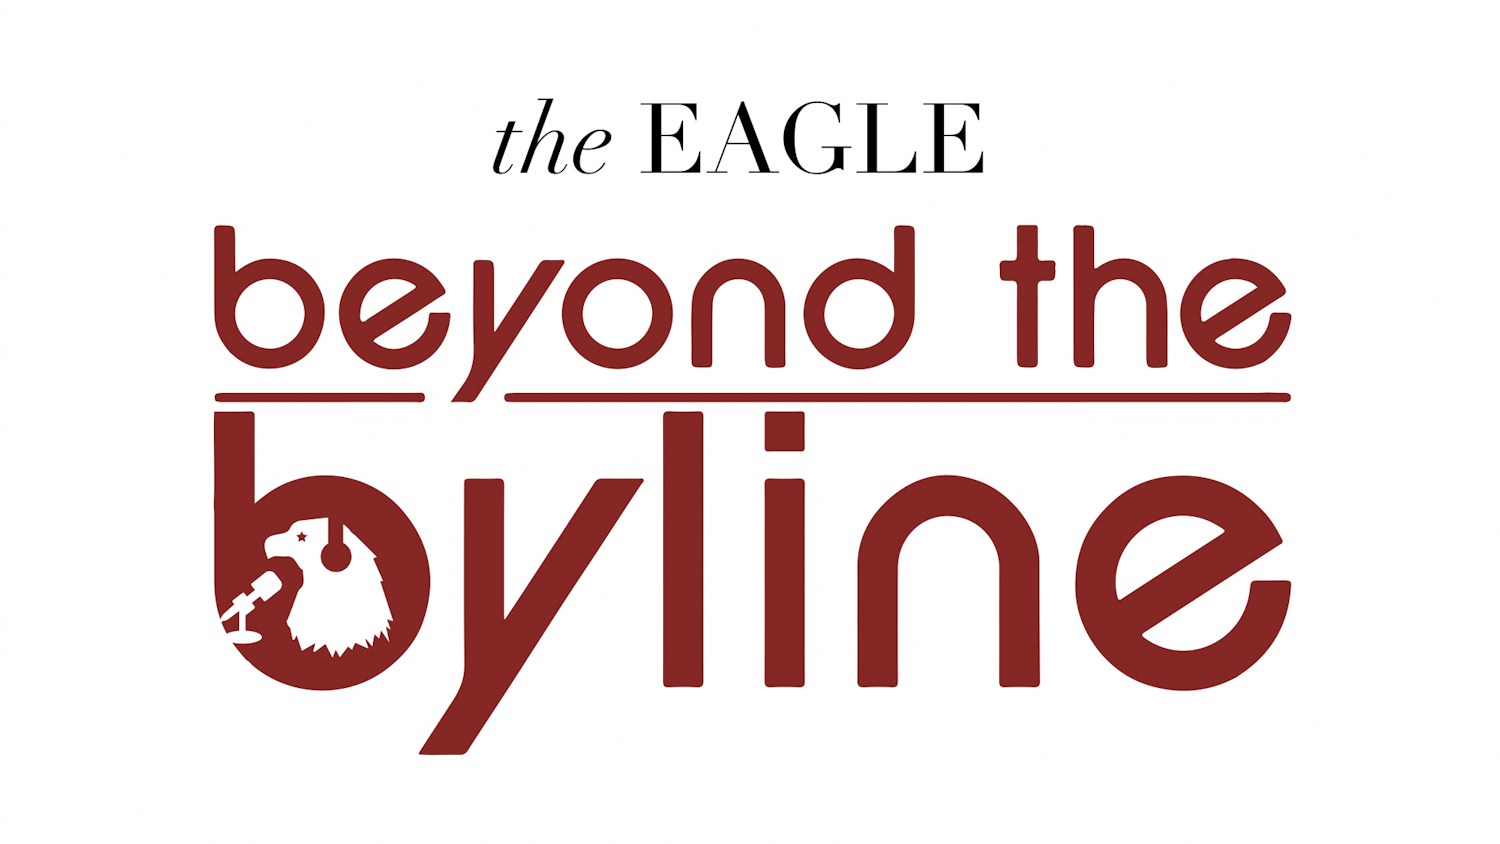 Beyond The Byline Cover Draft (1)-01.png